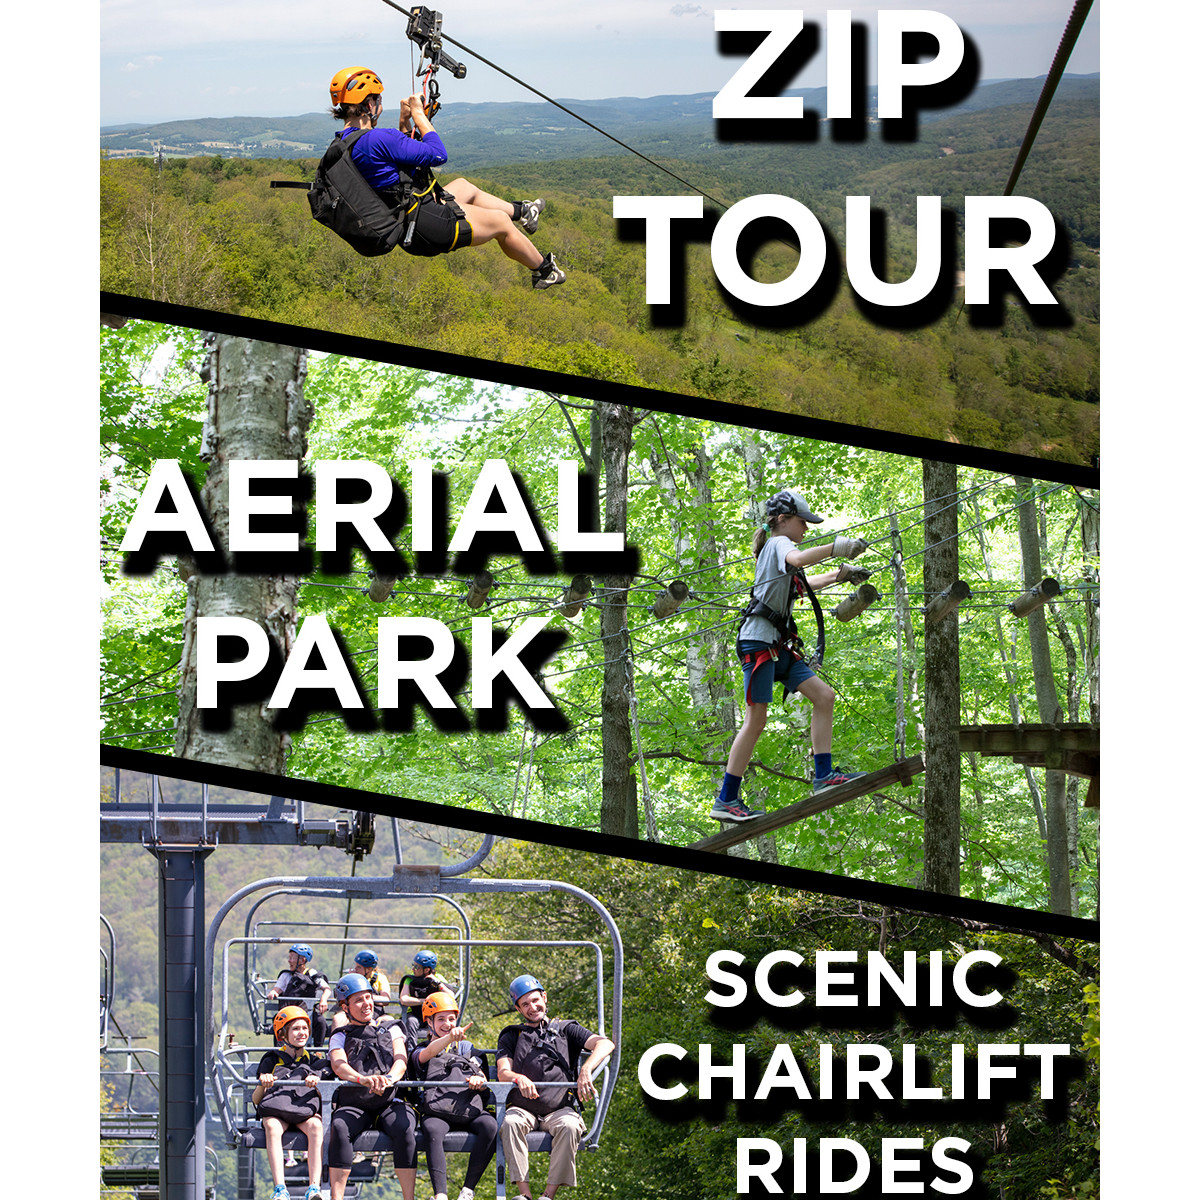 Catamount Zip Tour/Aerial Park/Chairlift Rides